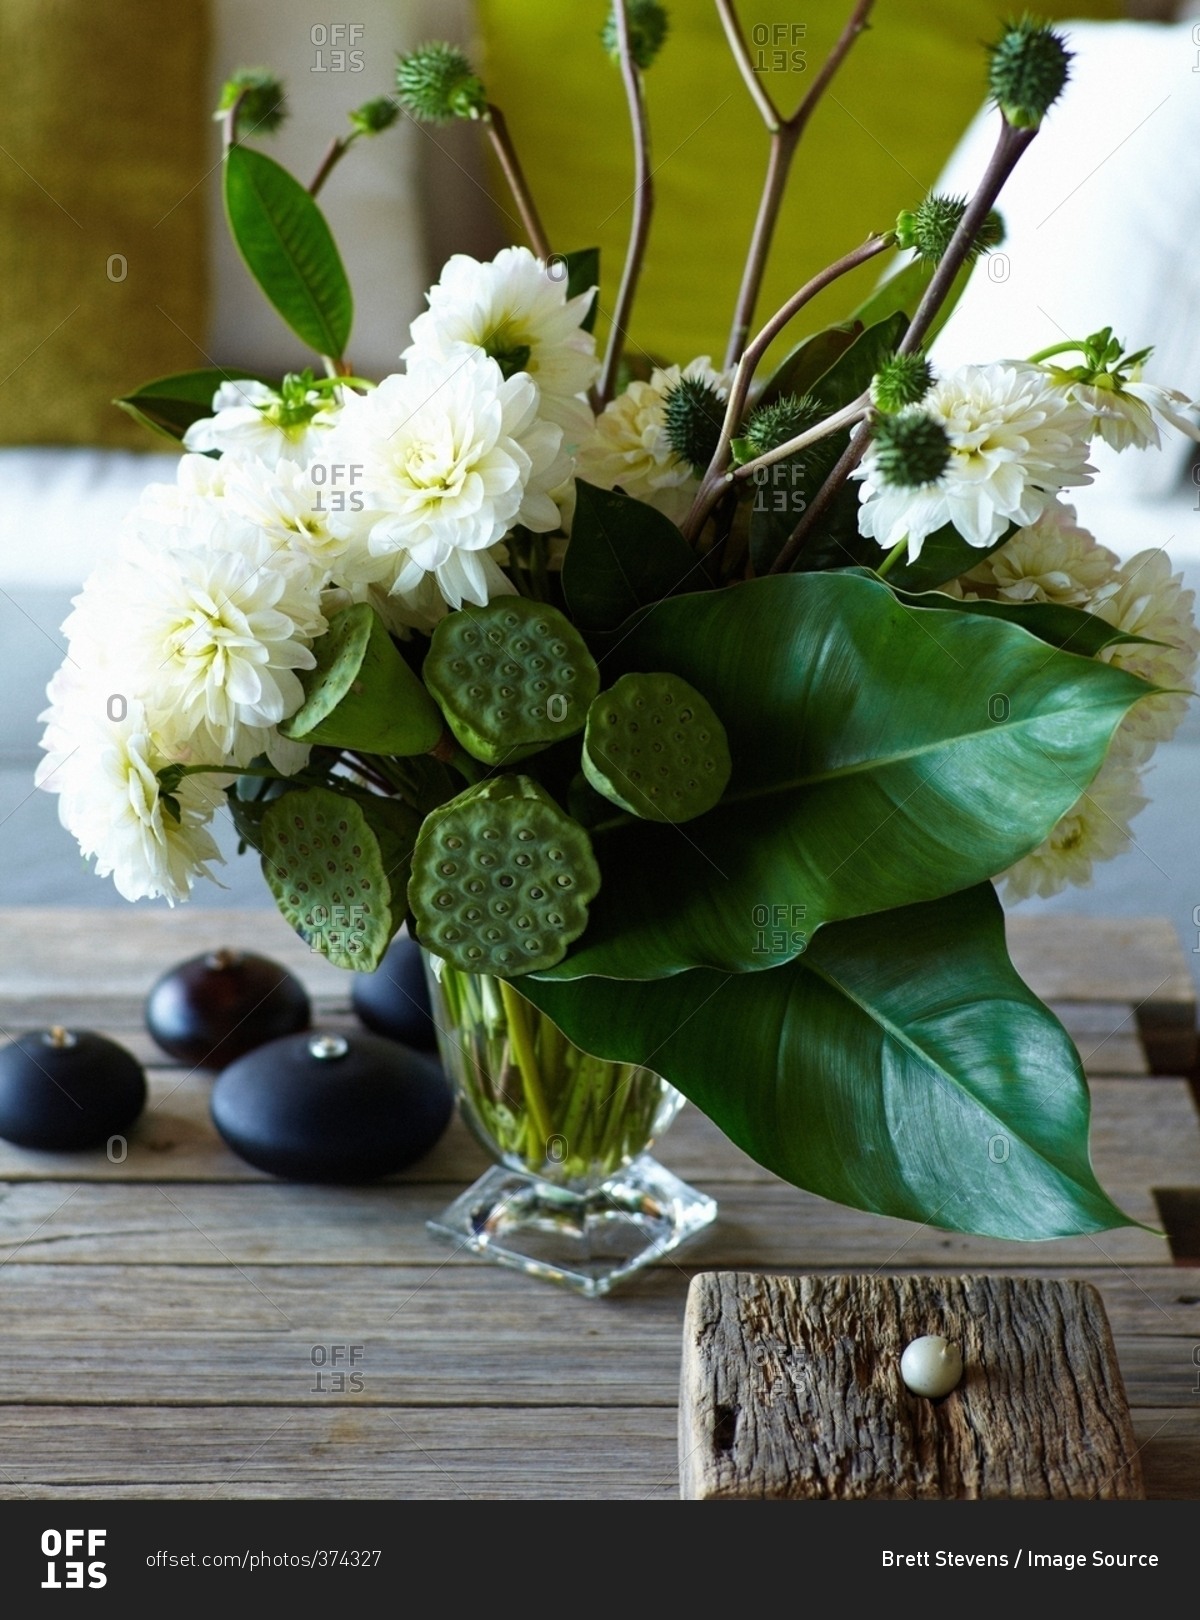 Vase of organic plants and white flowers on table